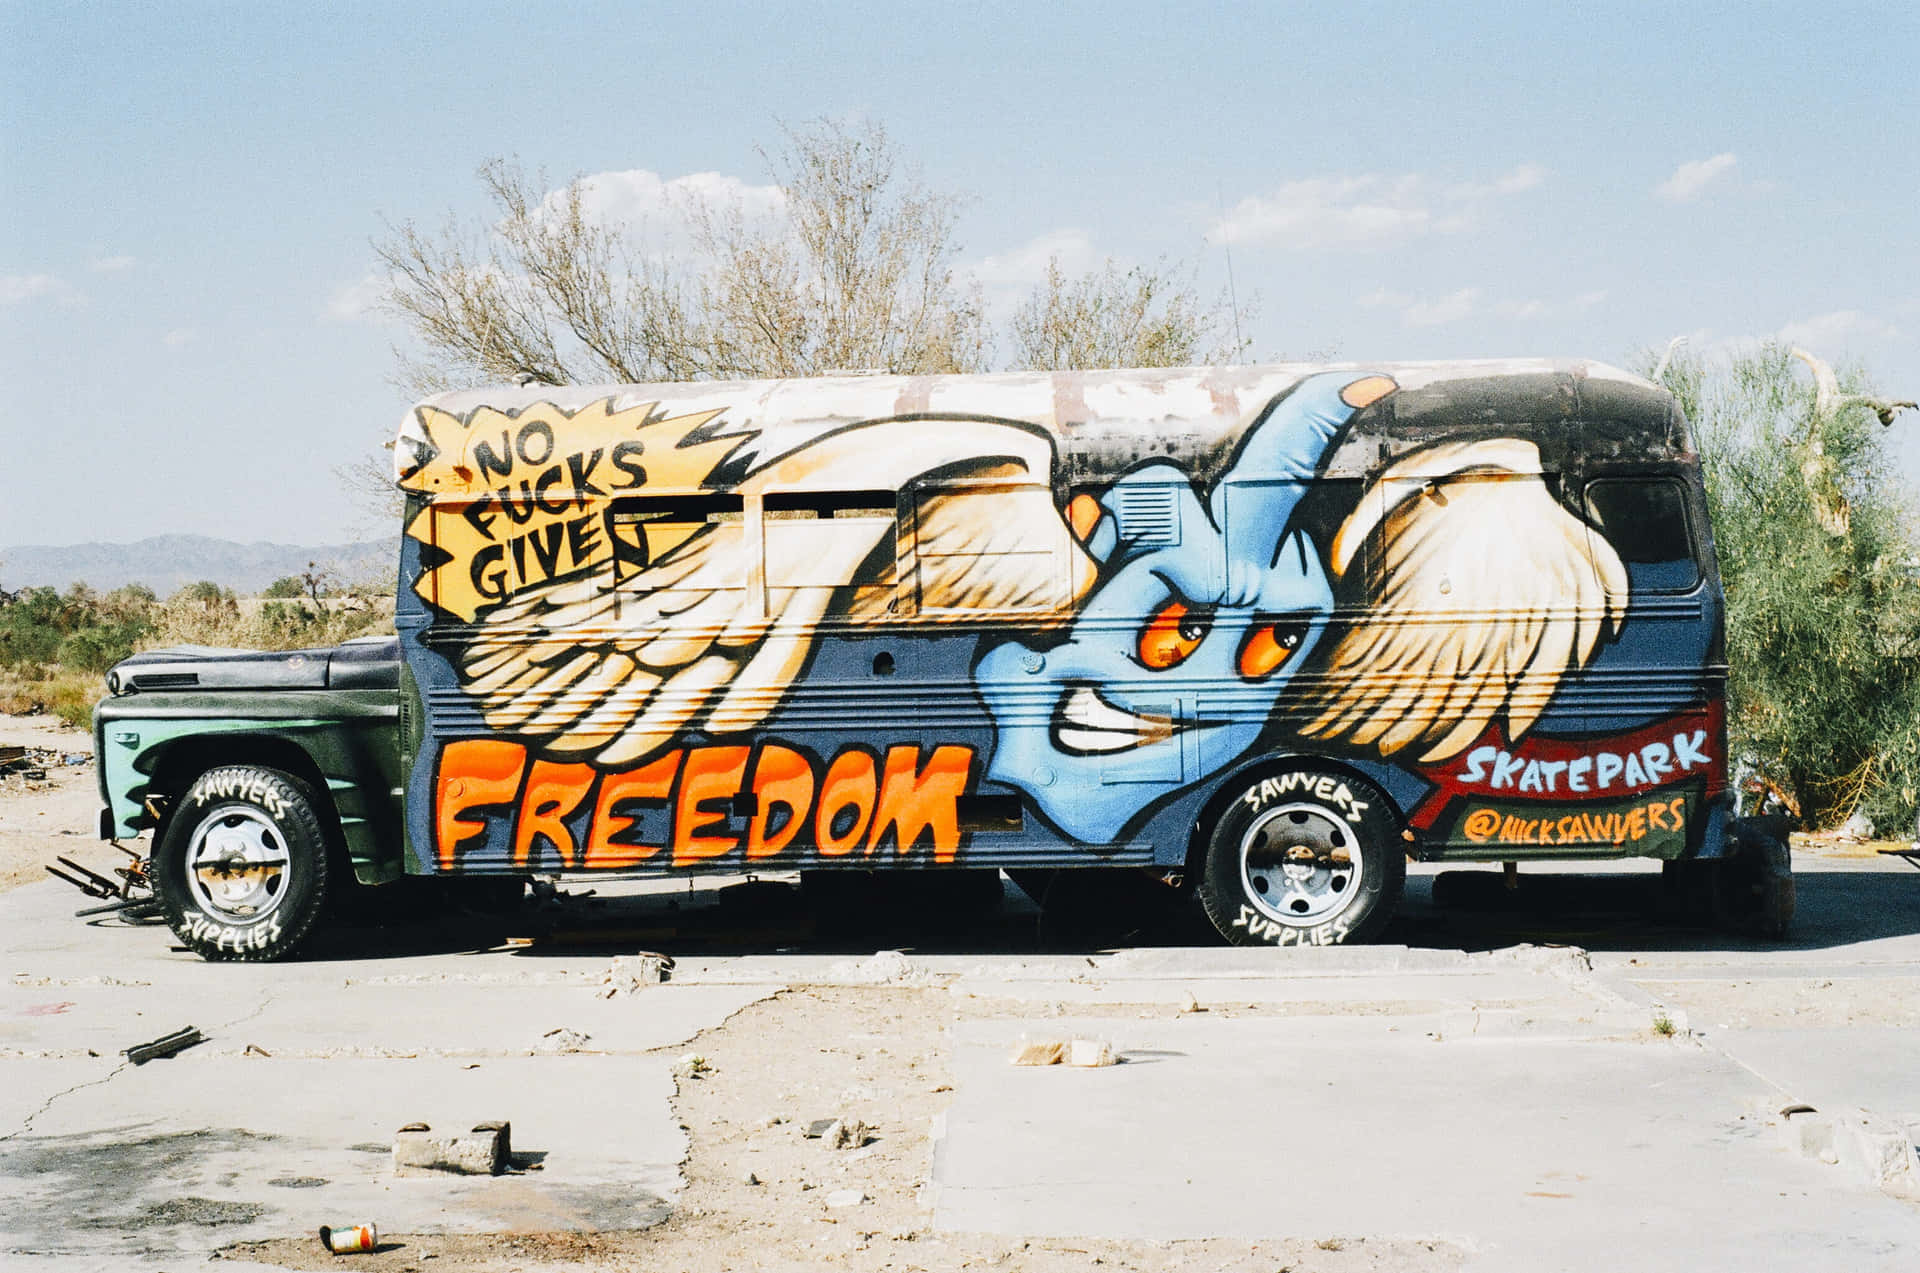 A Bus With Graffiti On It